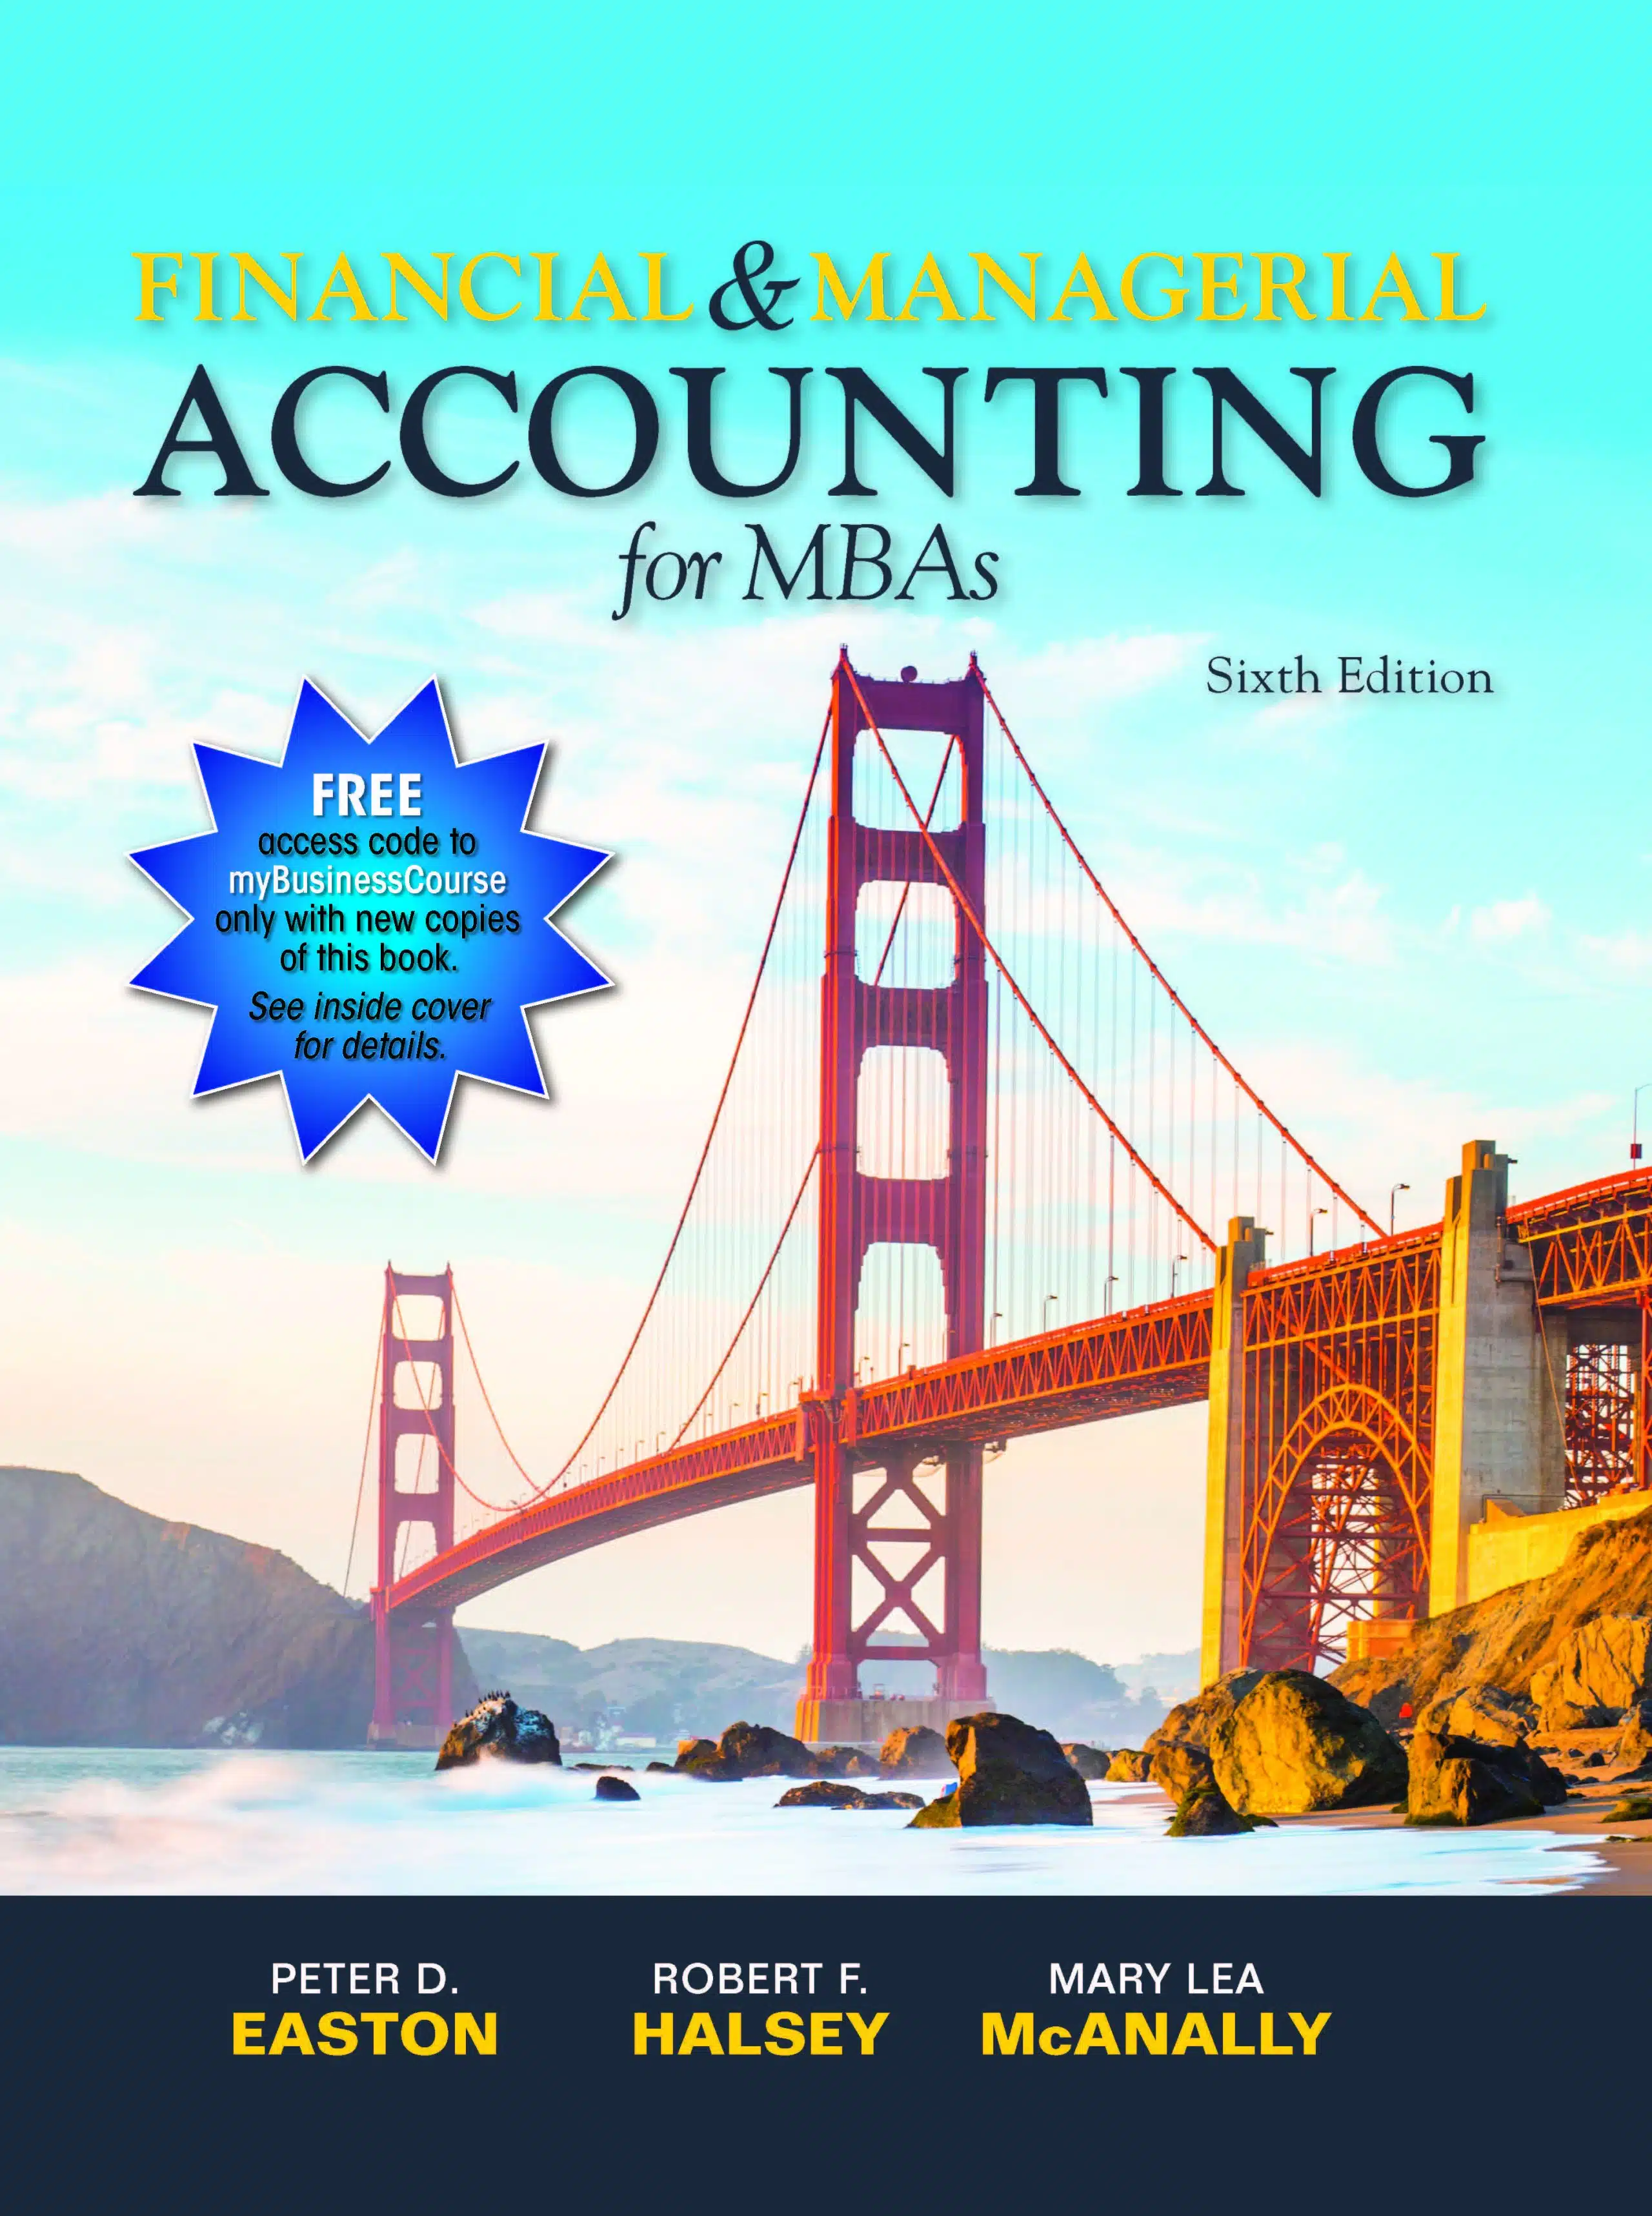 Financial & Managerial Accounting for MBAs, 6e by Easton, Halsey, McAnally 2021 ,Test bank